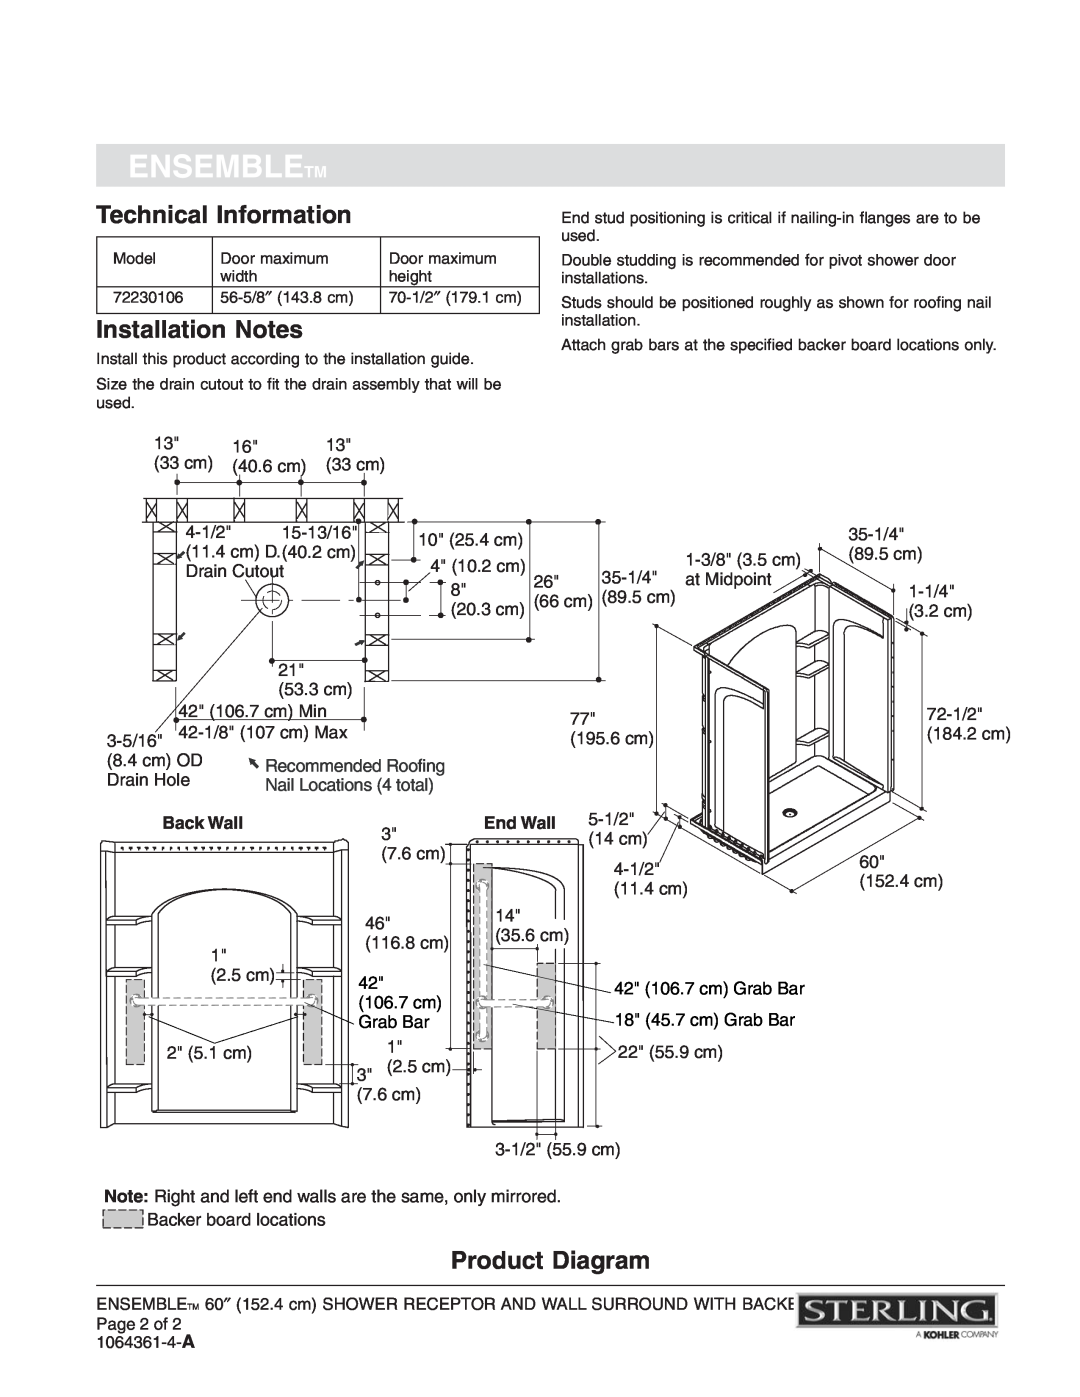 Sterling Plumbing 72230106 Technical Information, Installation Notes, Product Diagram, Ensembletm, Recommended Roofing 